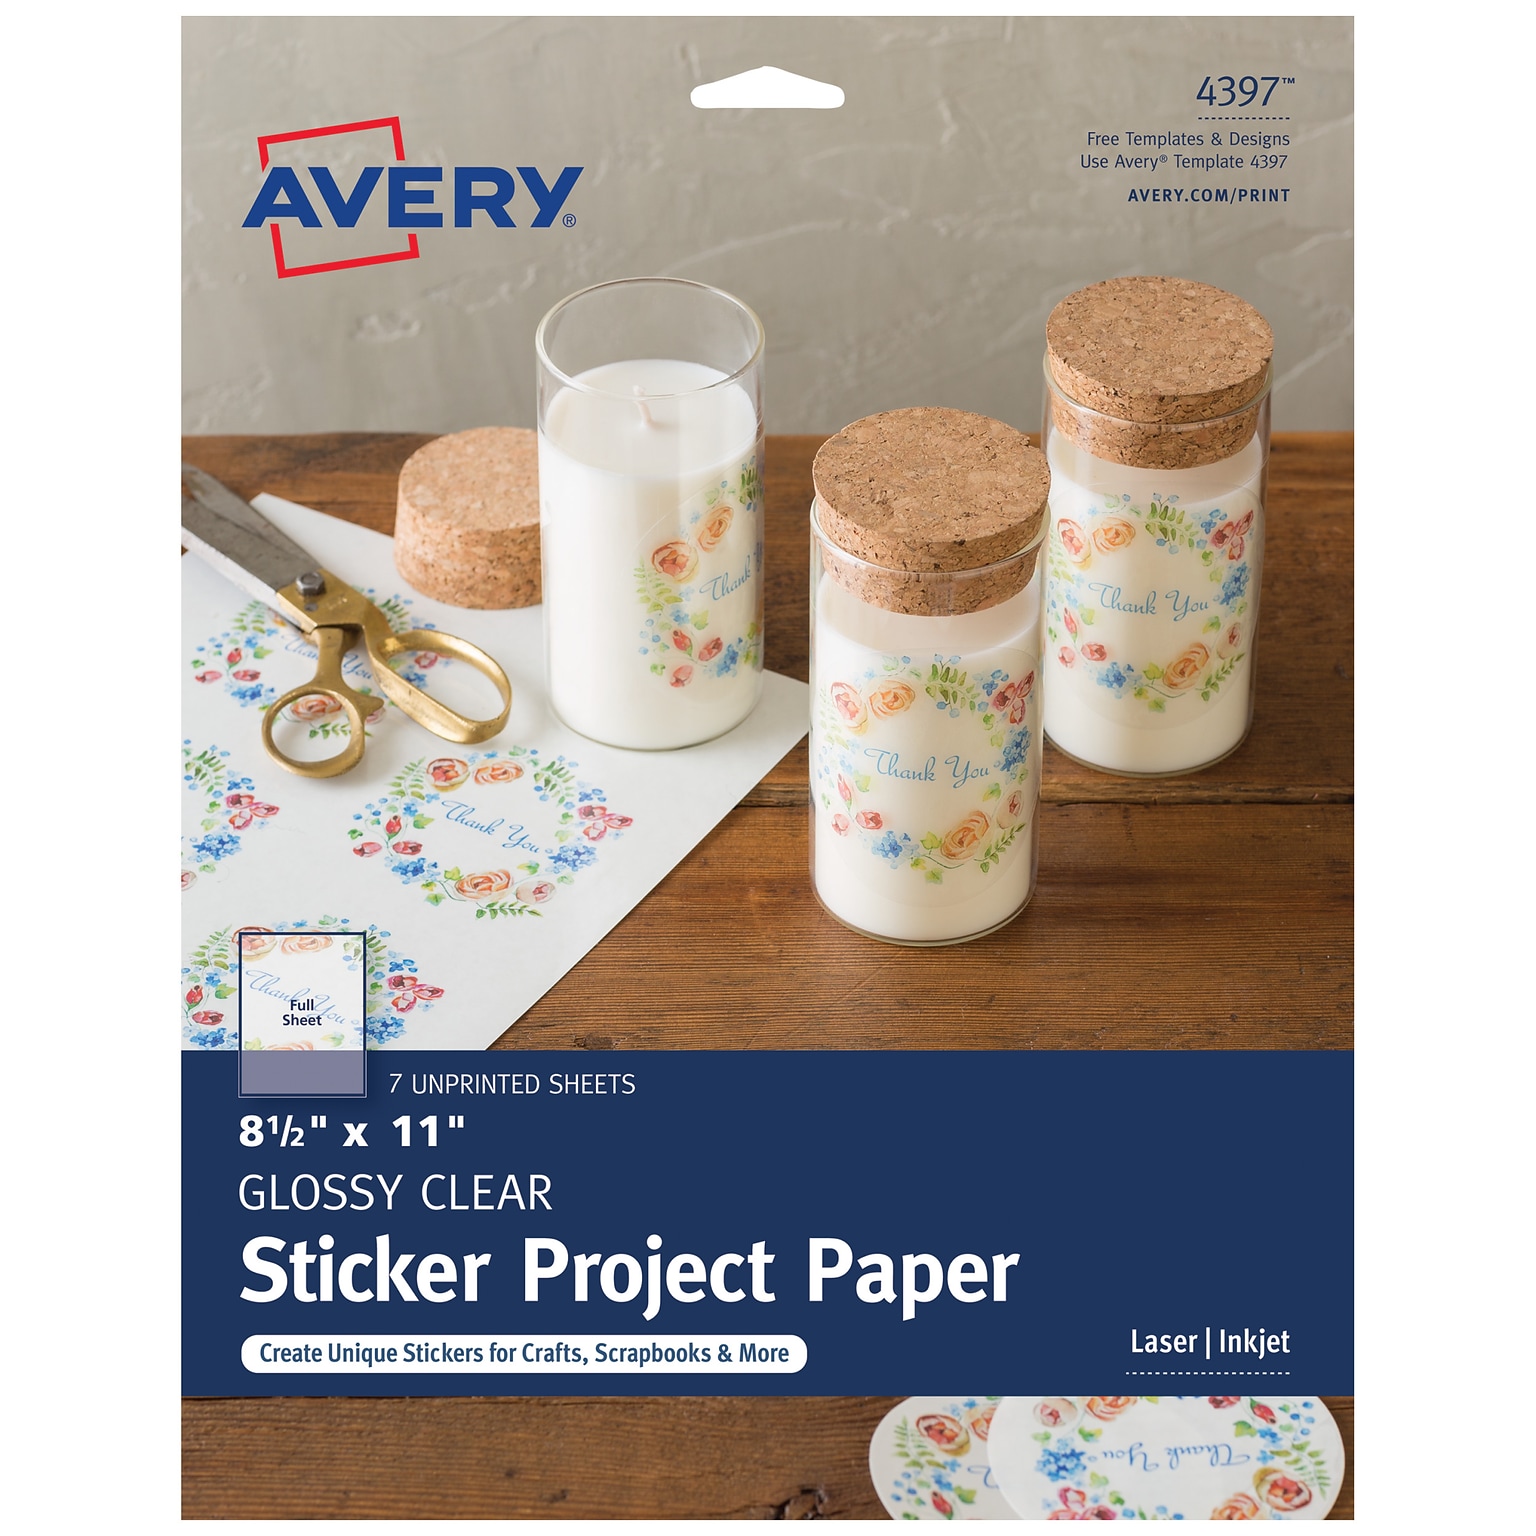 Avery Permanent Laser/Inkjet Sticker Paper, 8.5 x 11, Glossy Clear, 1 Label/Sheet, 7 Sheets/Pack, 7 Stickers/Pack (4397)